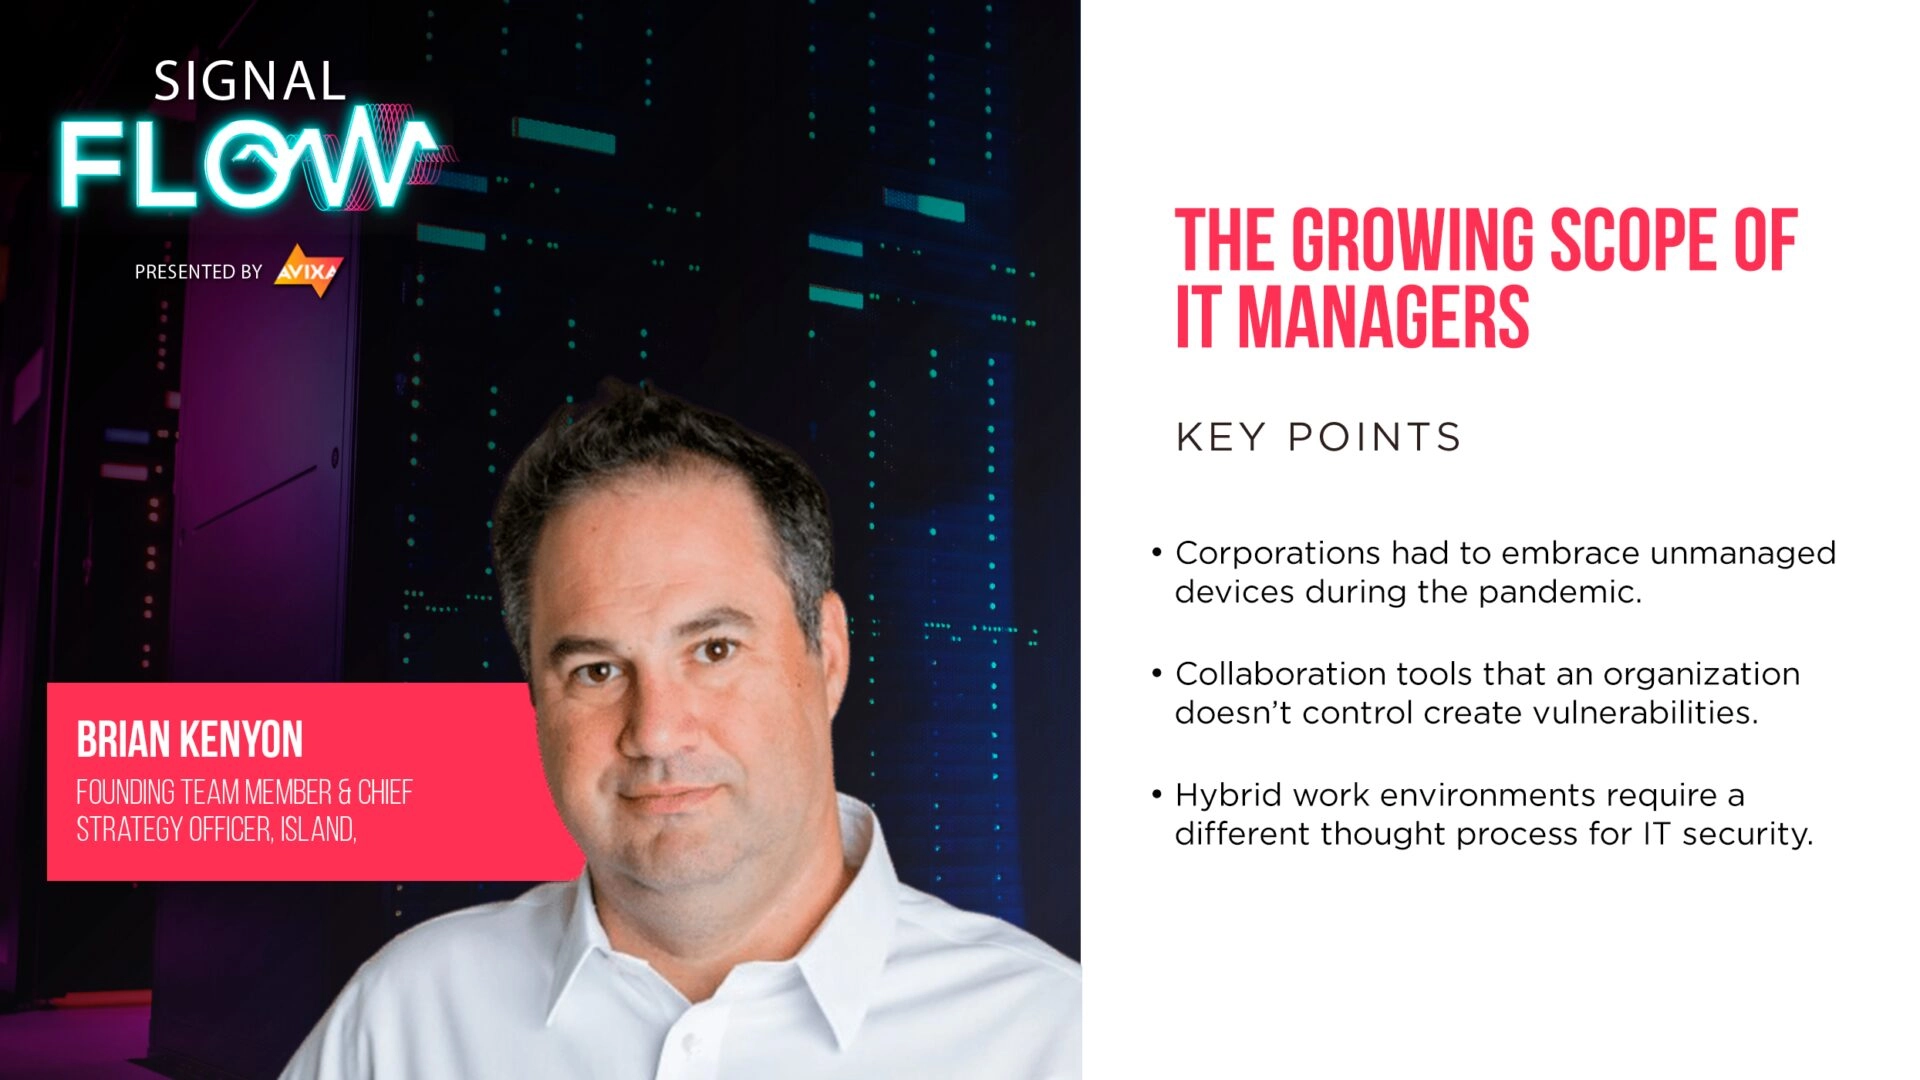 The Growing Scope of IT Managers